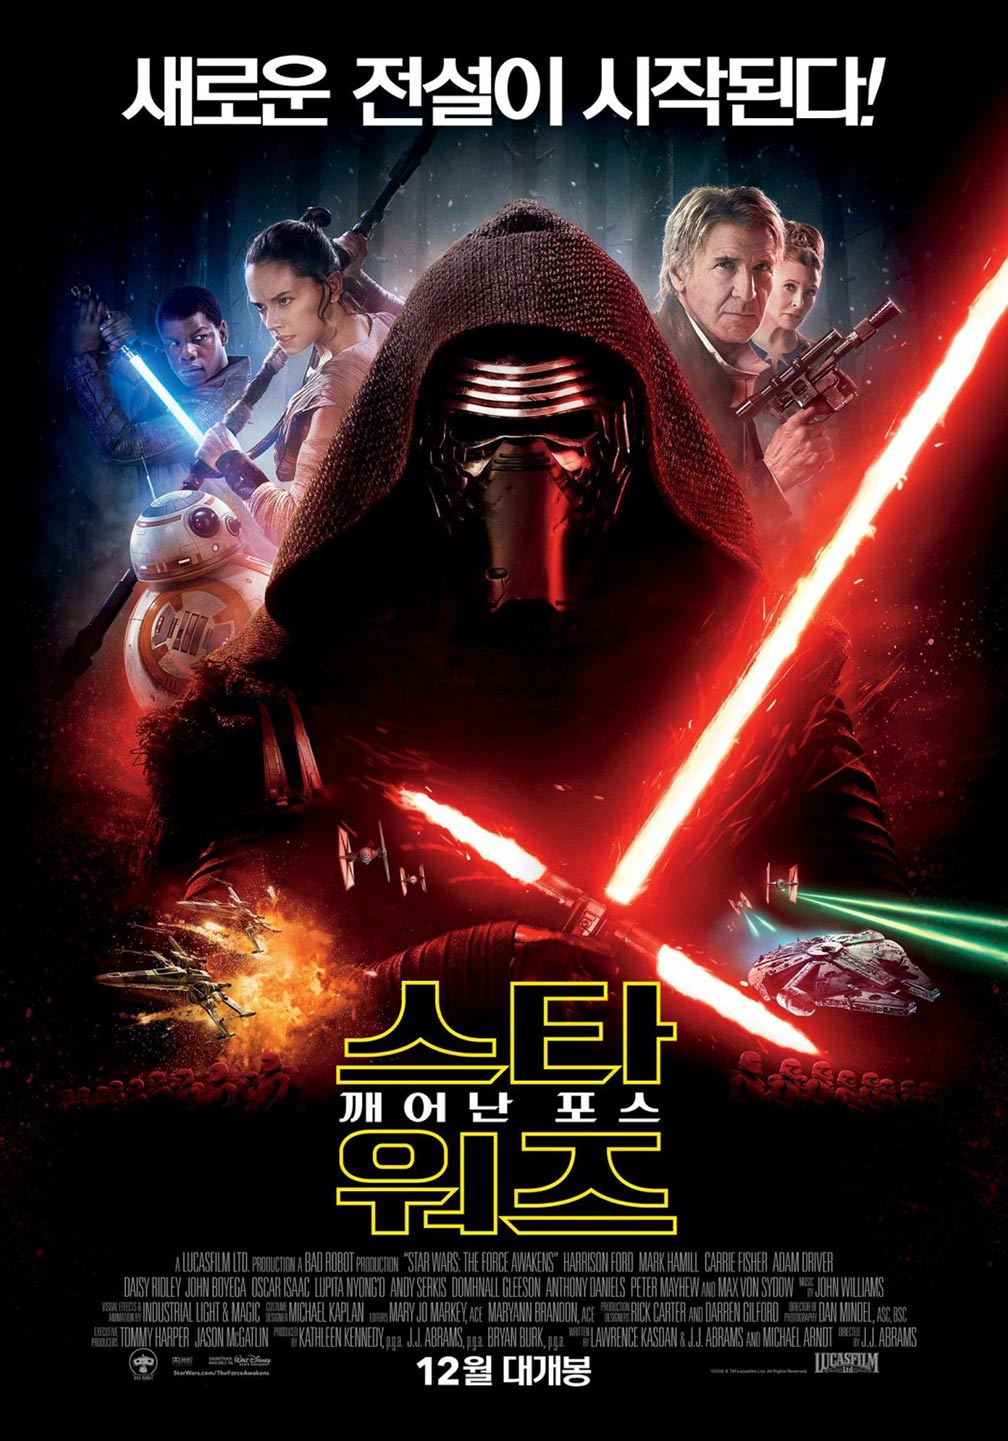 Star Wars Ep. VII: The Force Awakens instaling